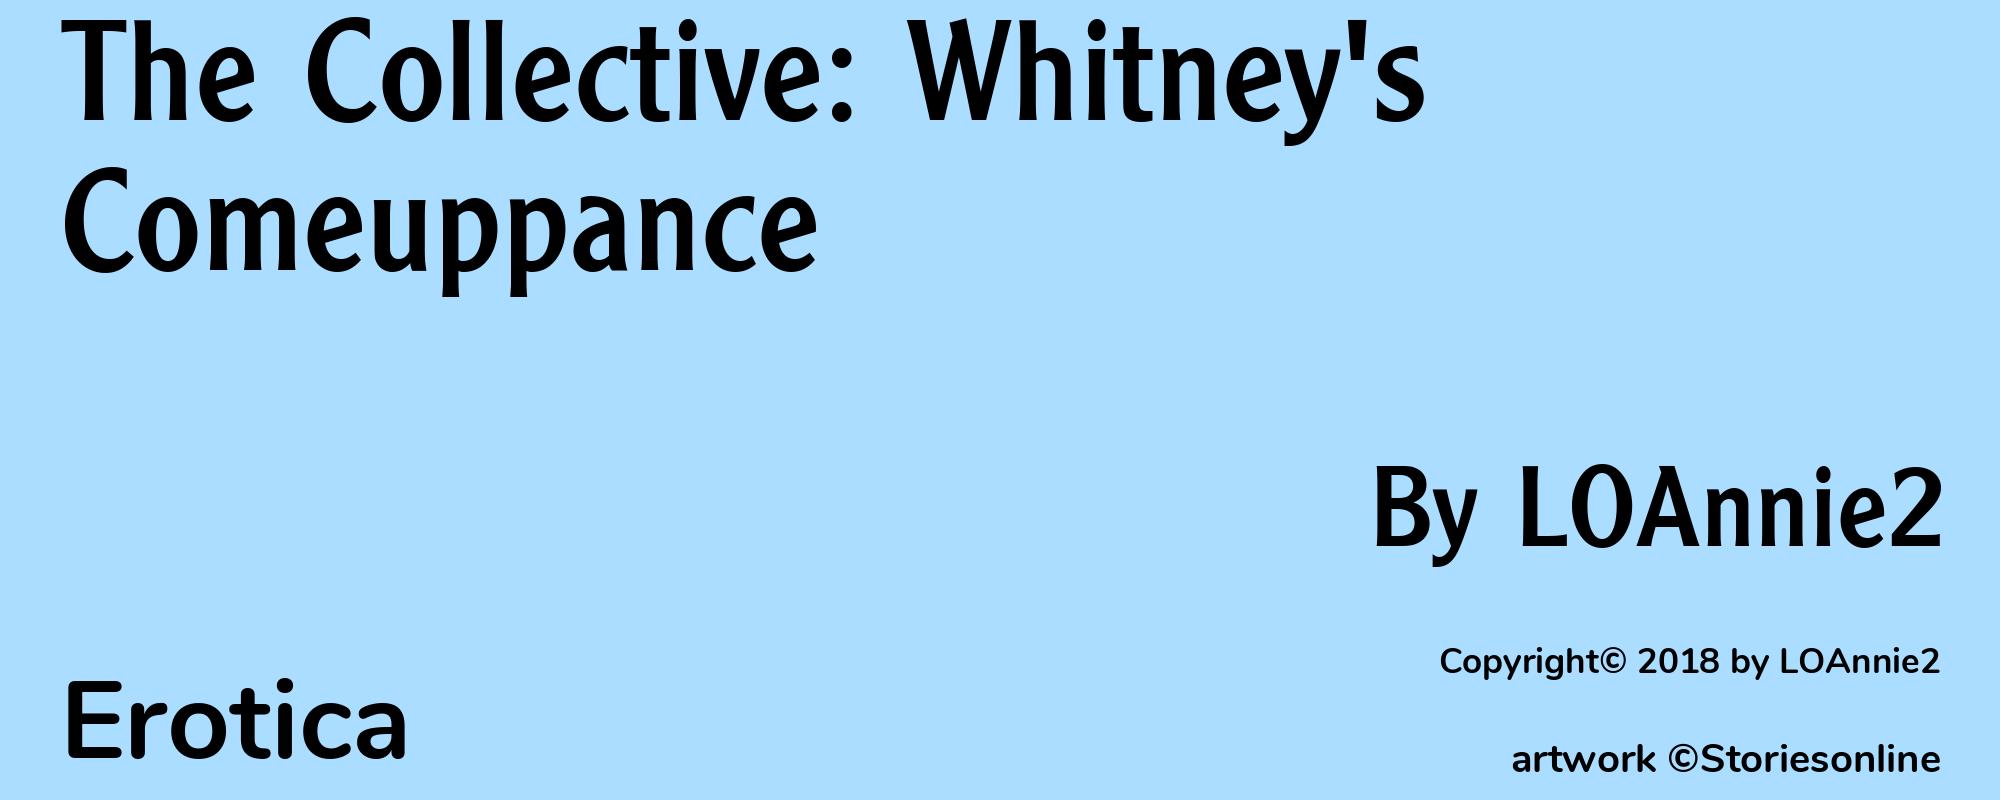 The Collective: Whitney's Comeuppance - Cover